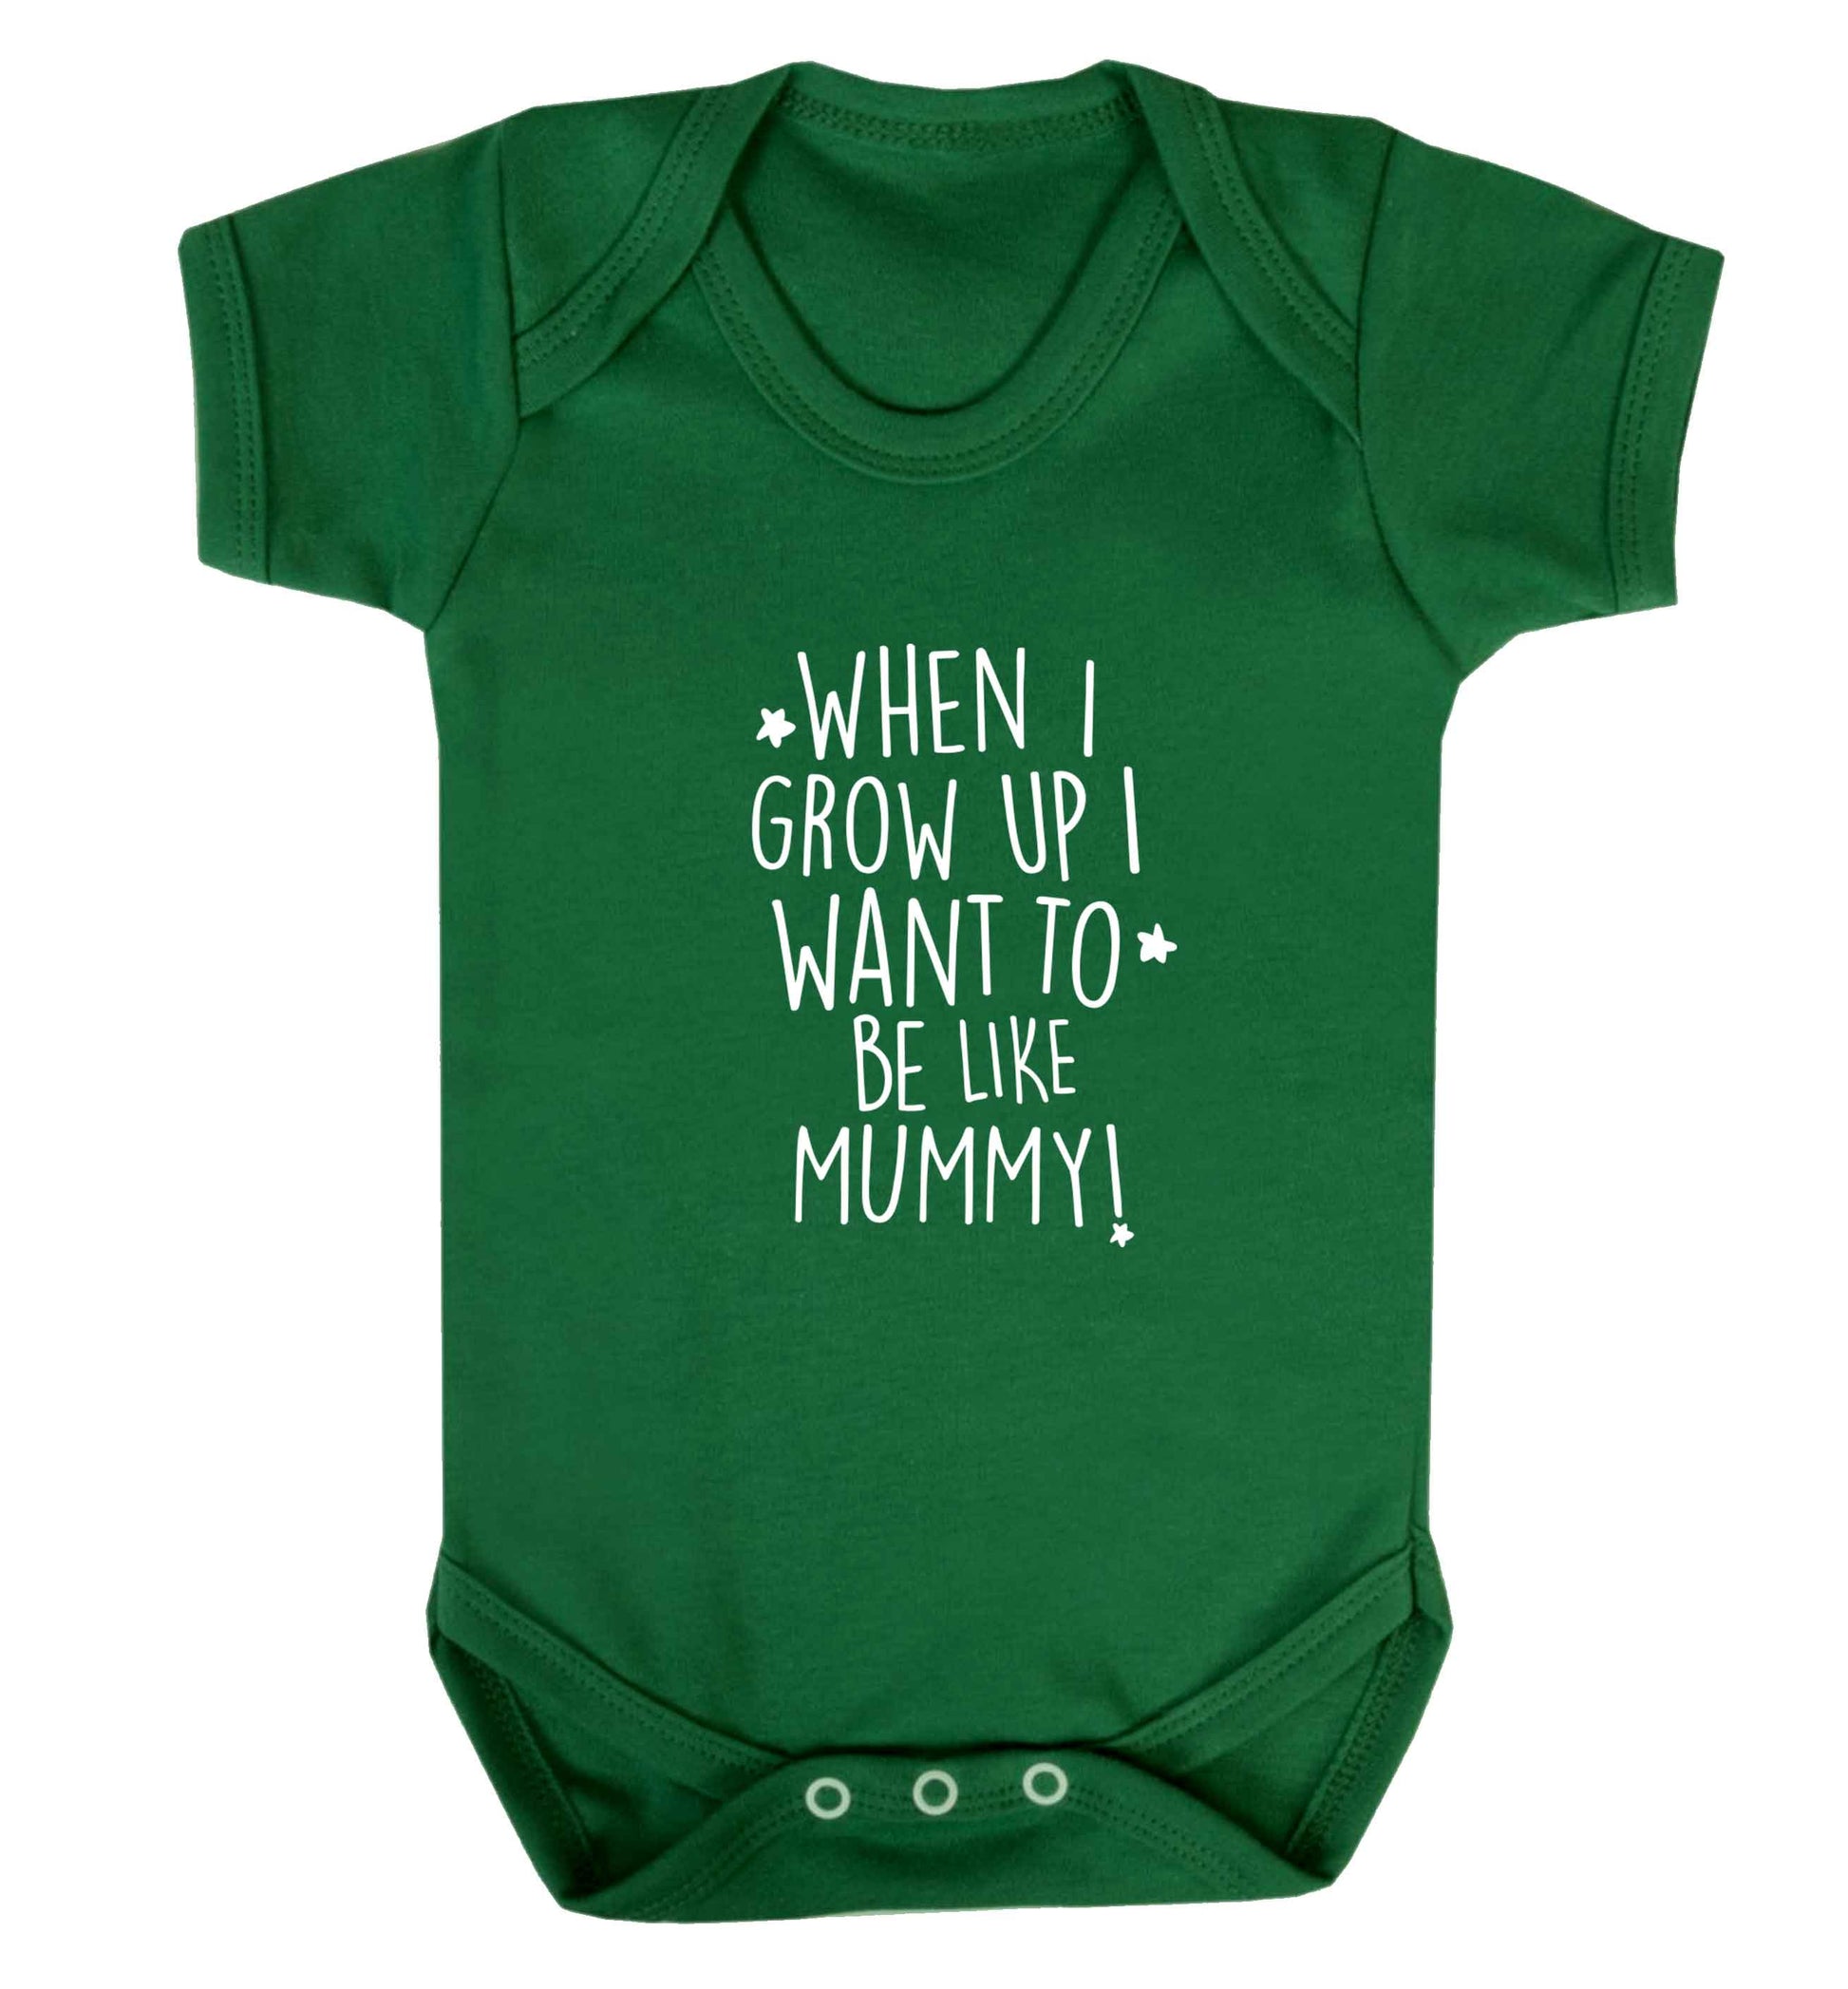 When I grow up I want to be like my mummy baby vest green 18-24 months